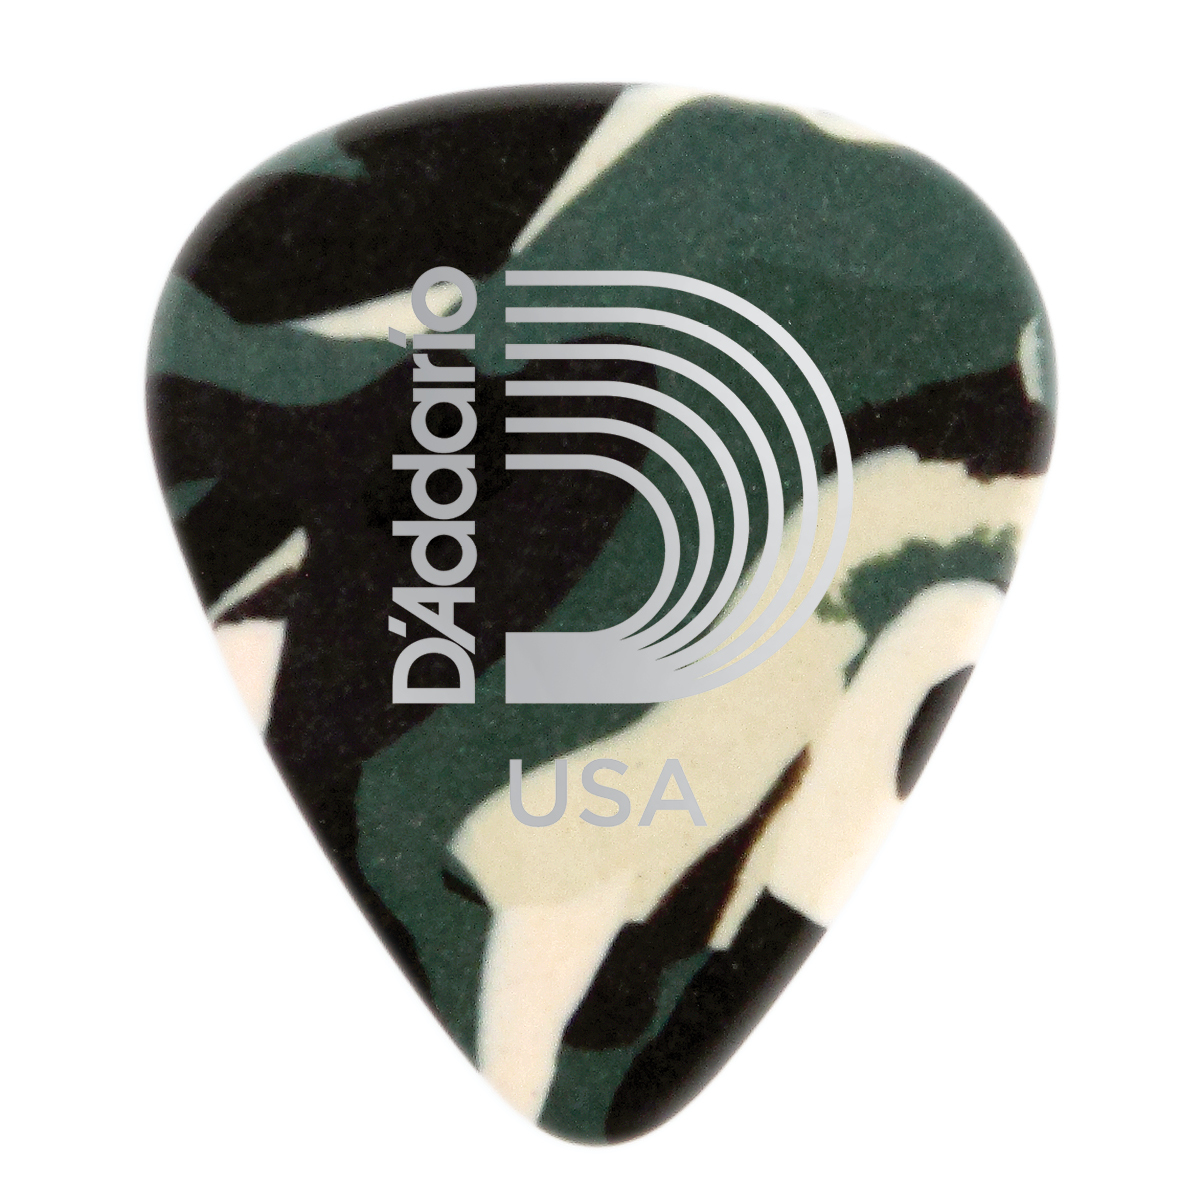 D'Addario Camouflage Celluloid Guitar Pick, Extra-Heavy